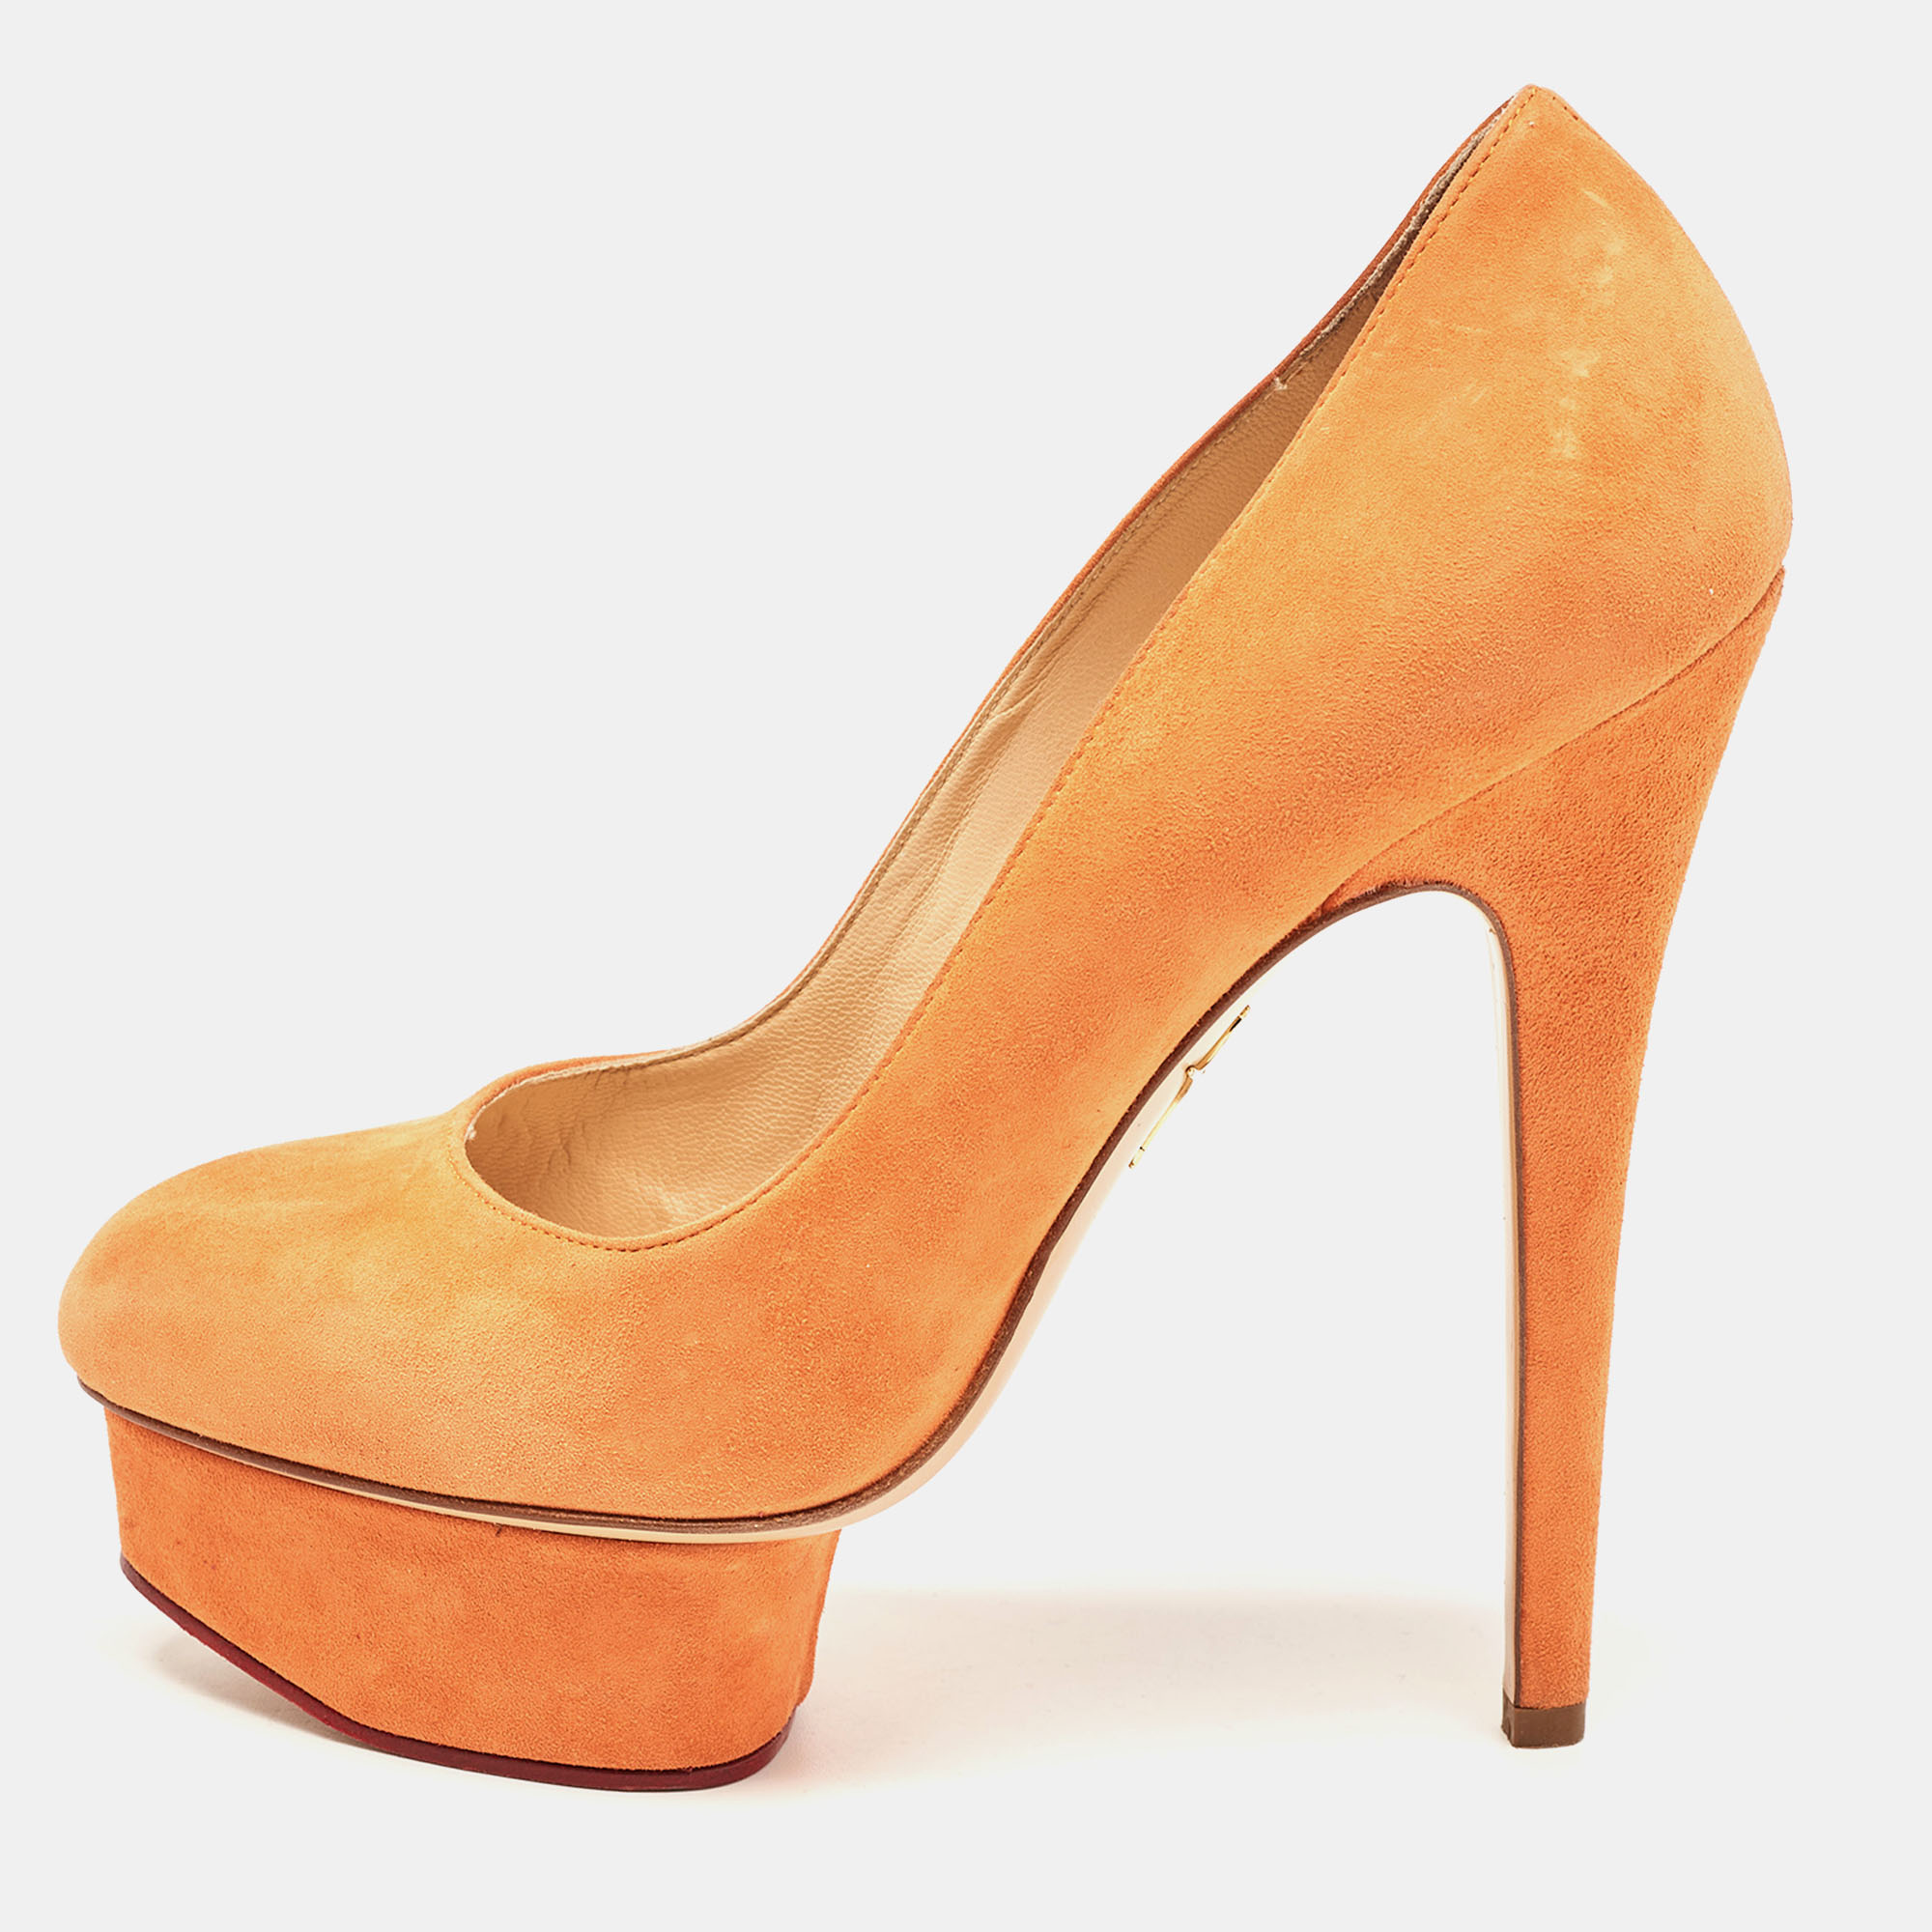 Pre-owned Charlotte Olympia Orange Suede Dolly Pumps Size 37